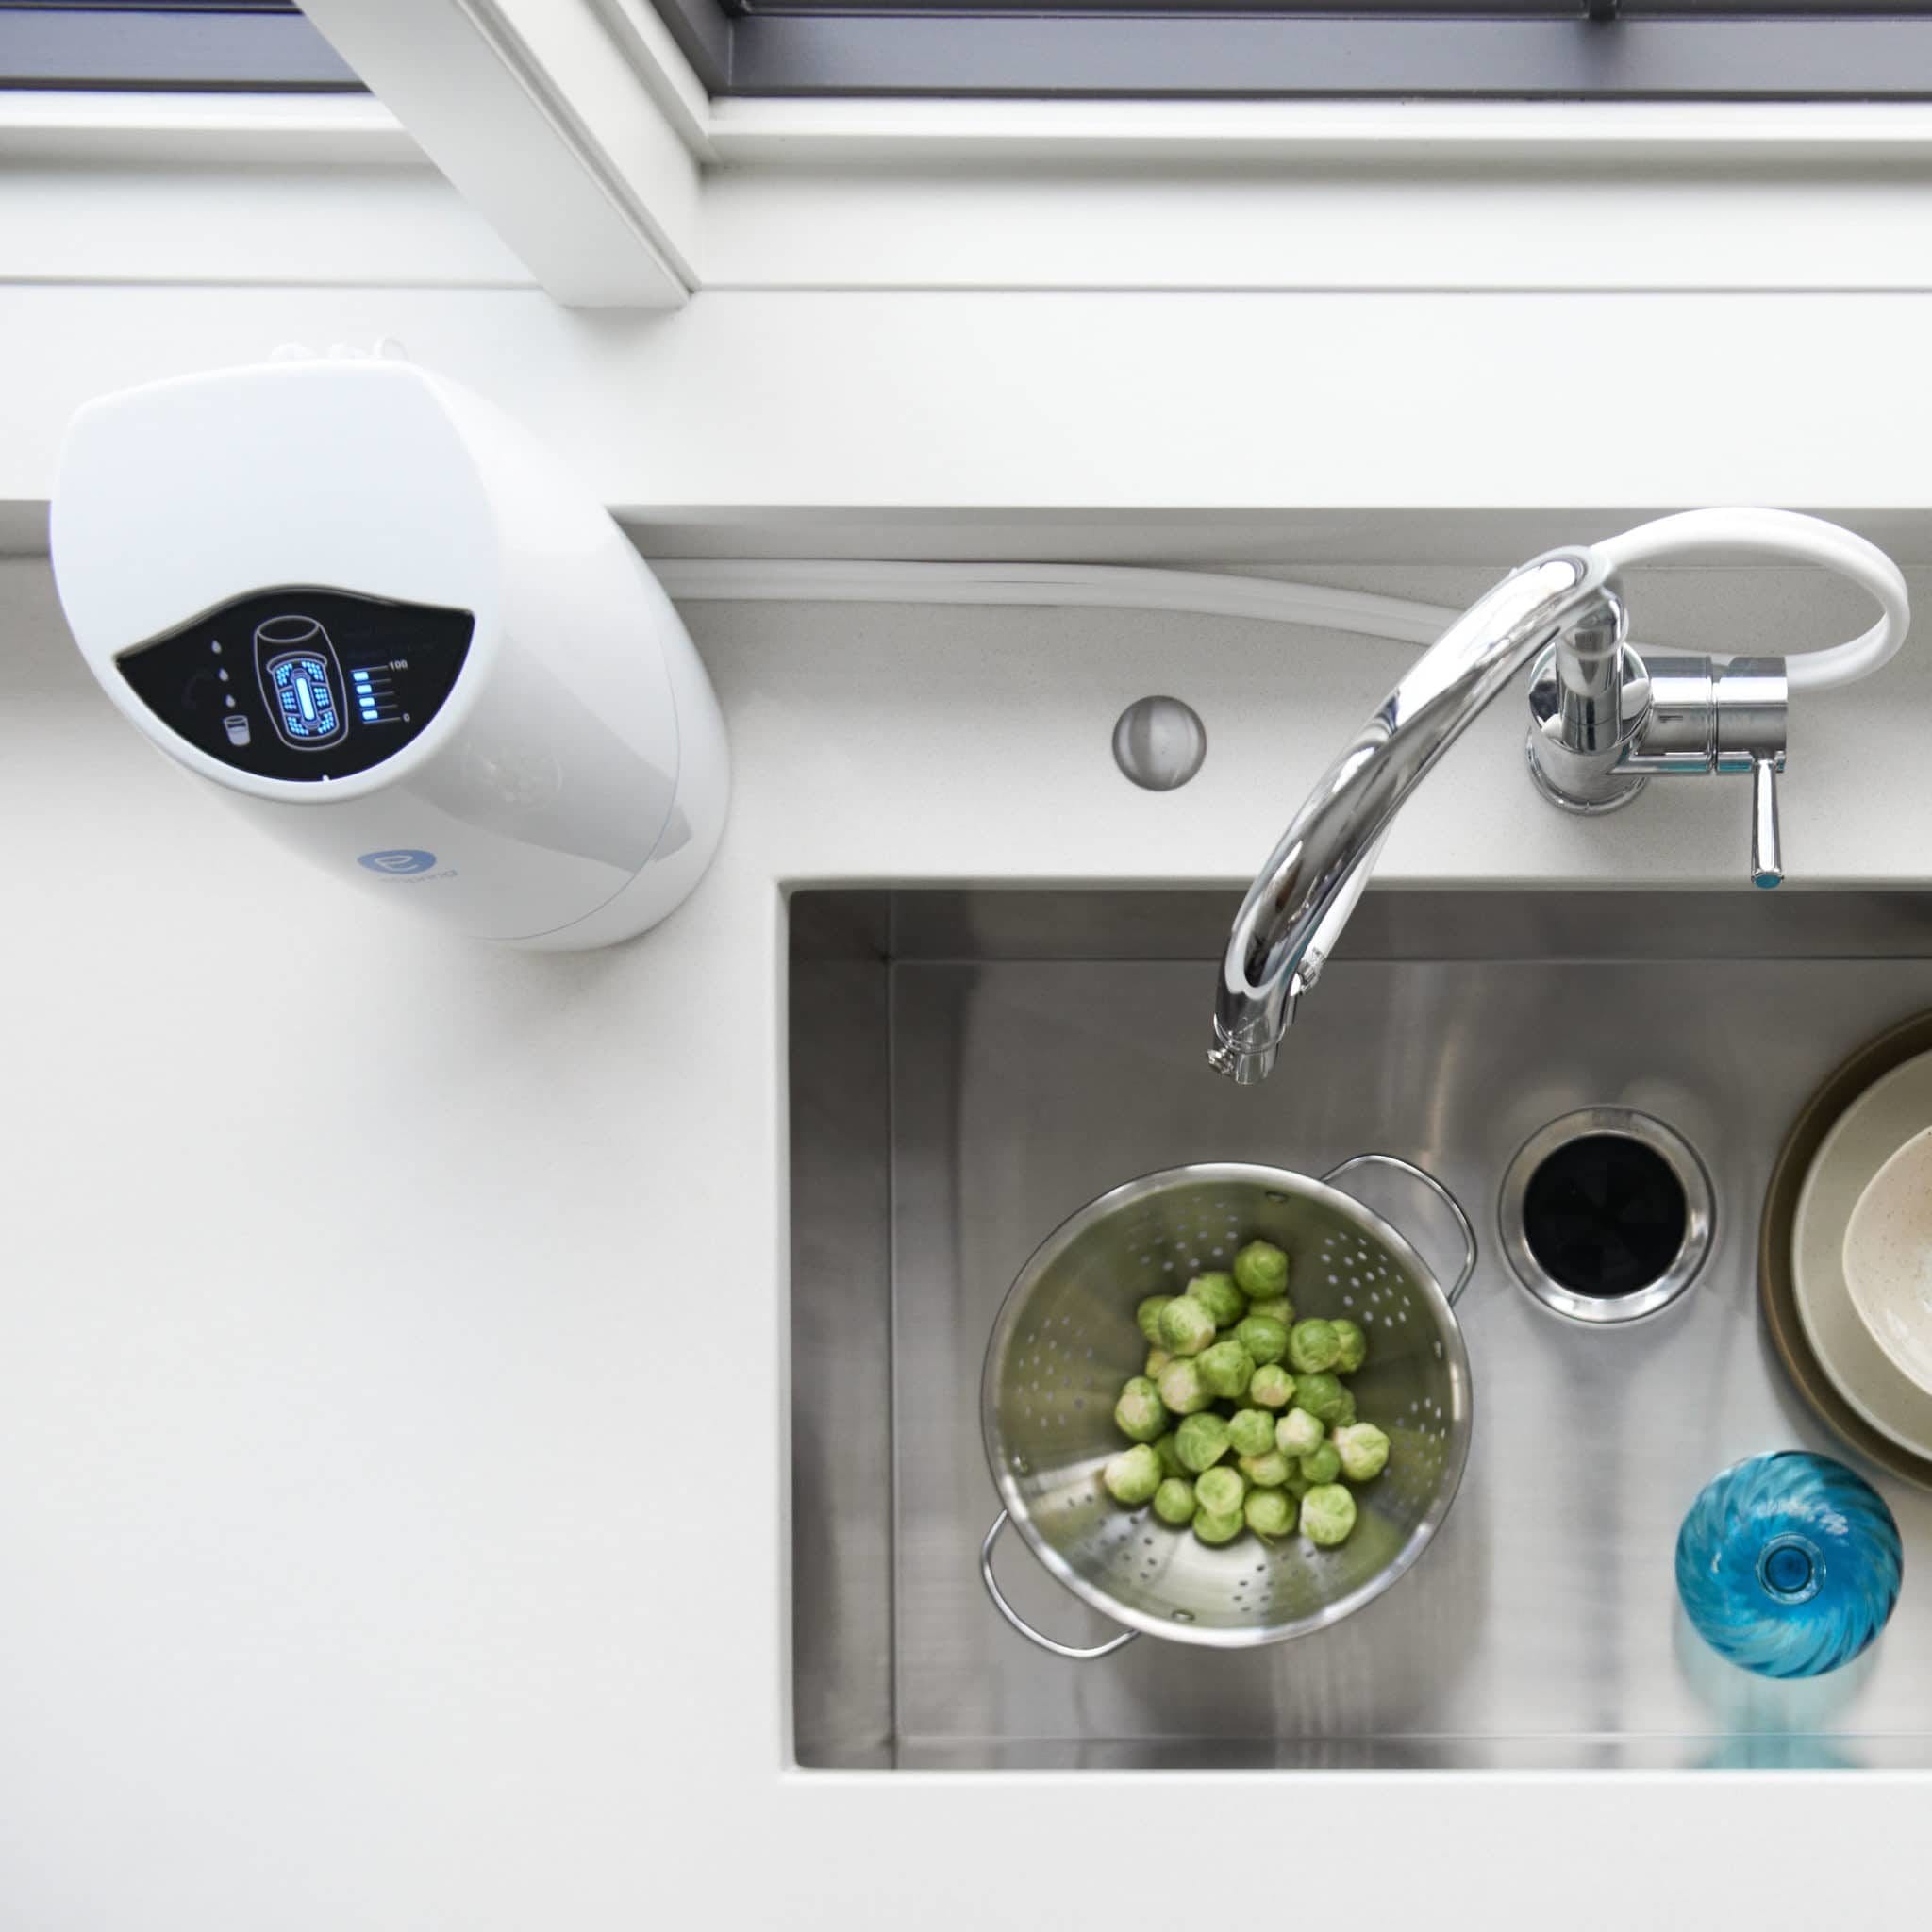 Overhead view of a kitchen sink connected to an eSpring water treatment system. A colander of brussels sprouts, a glass vase and plates are arranged in the sink. The eSpring's pressed carbon block filter effectively removes 140+ potential health-effect contaminants that may be present in drinking water, including lead, mercury, disinfectant by-products and volatile organic compounds.